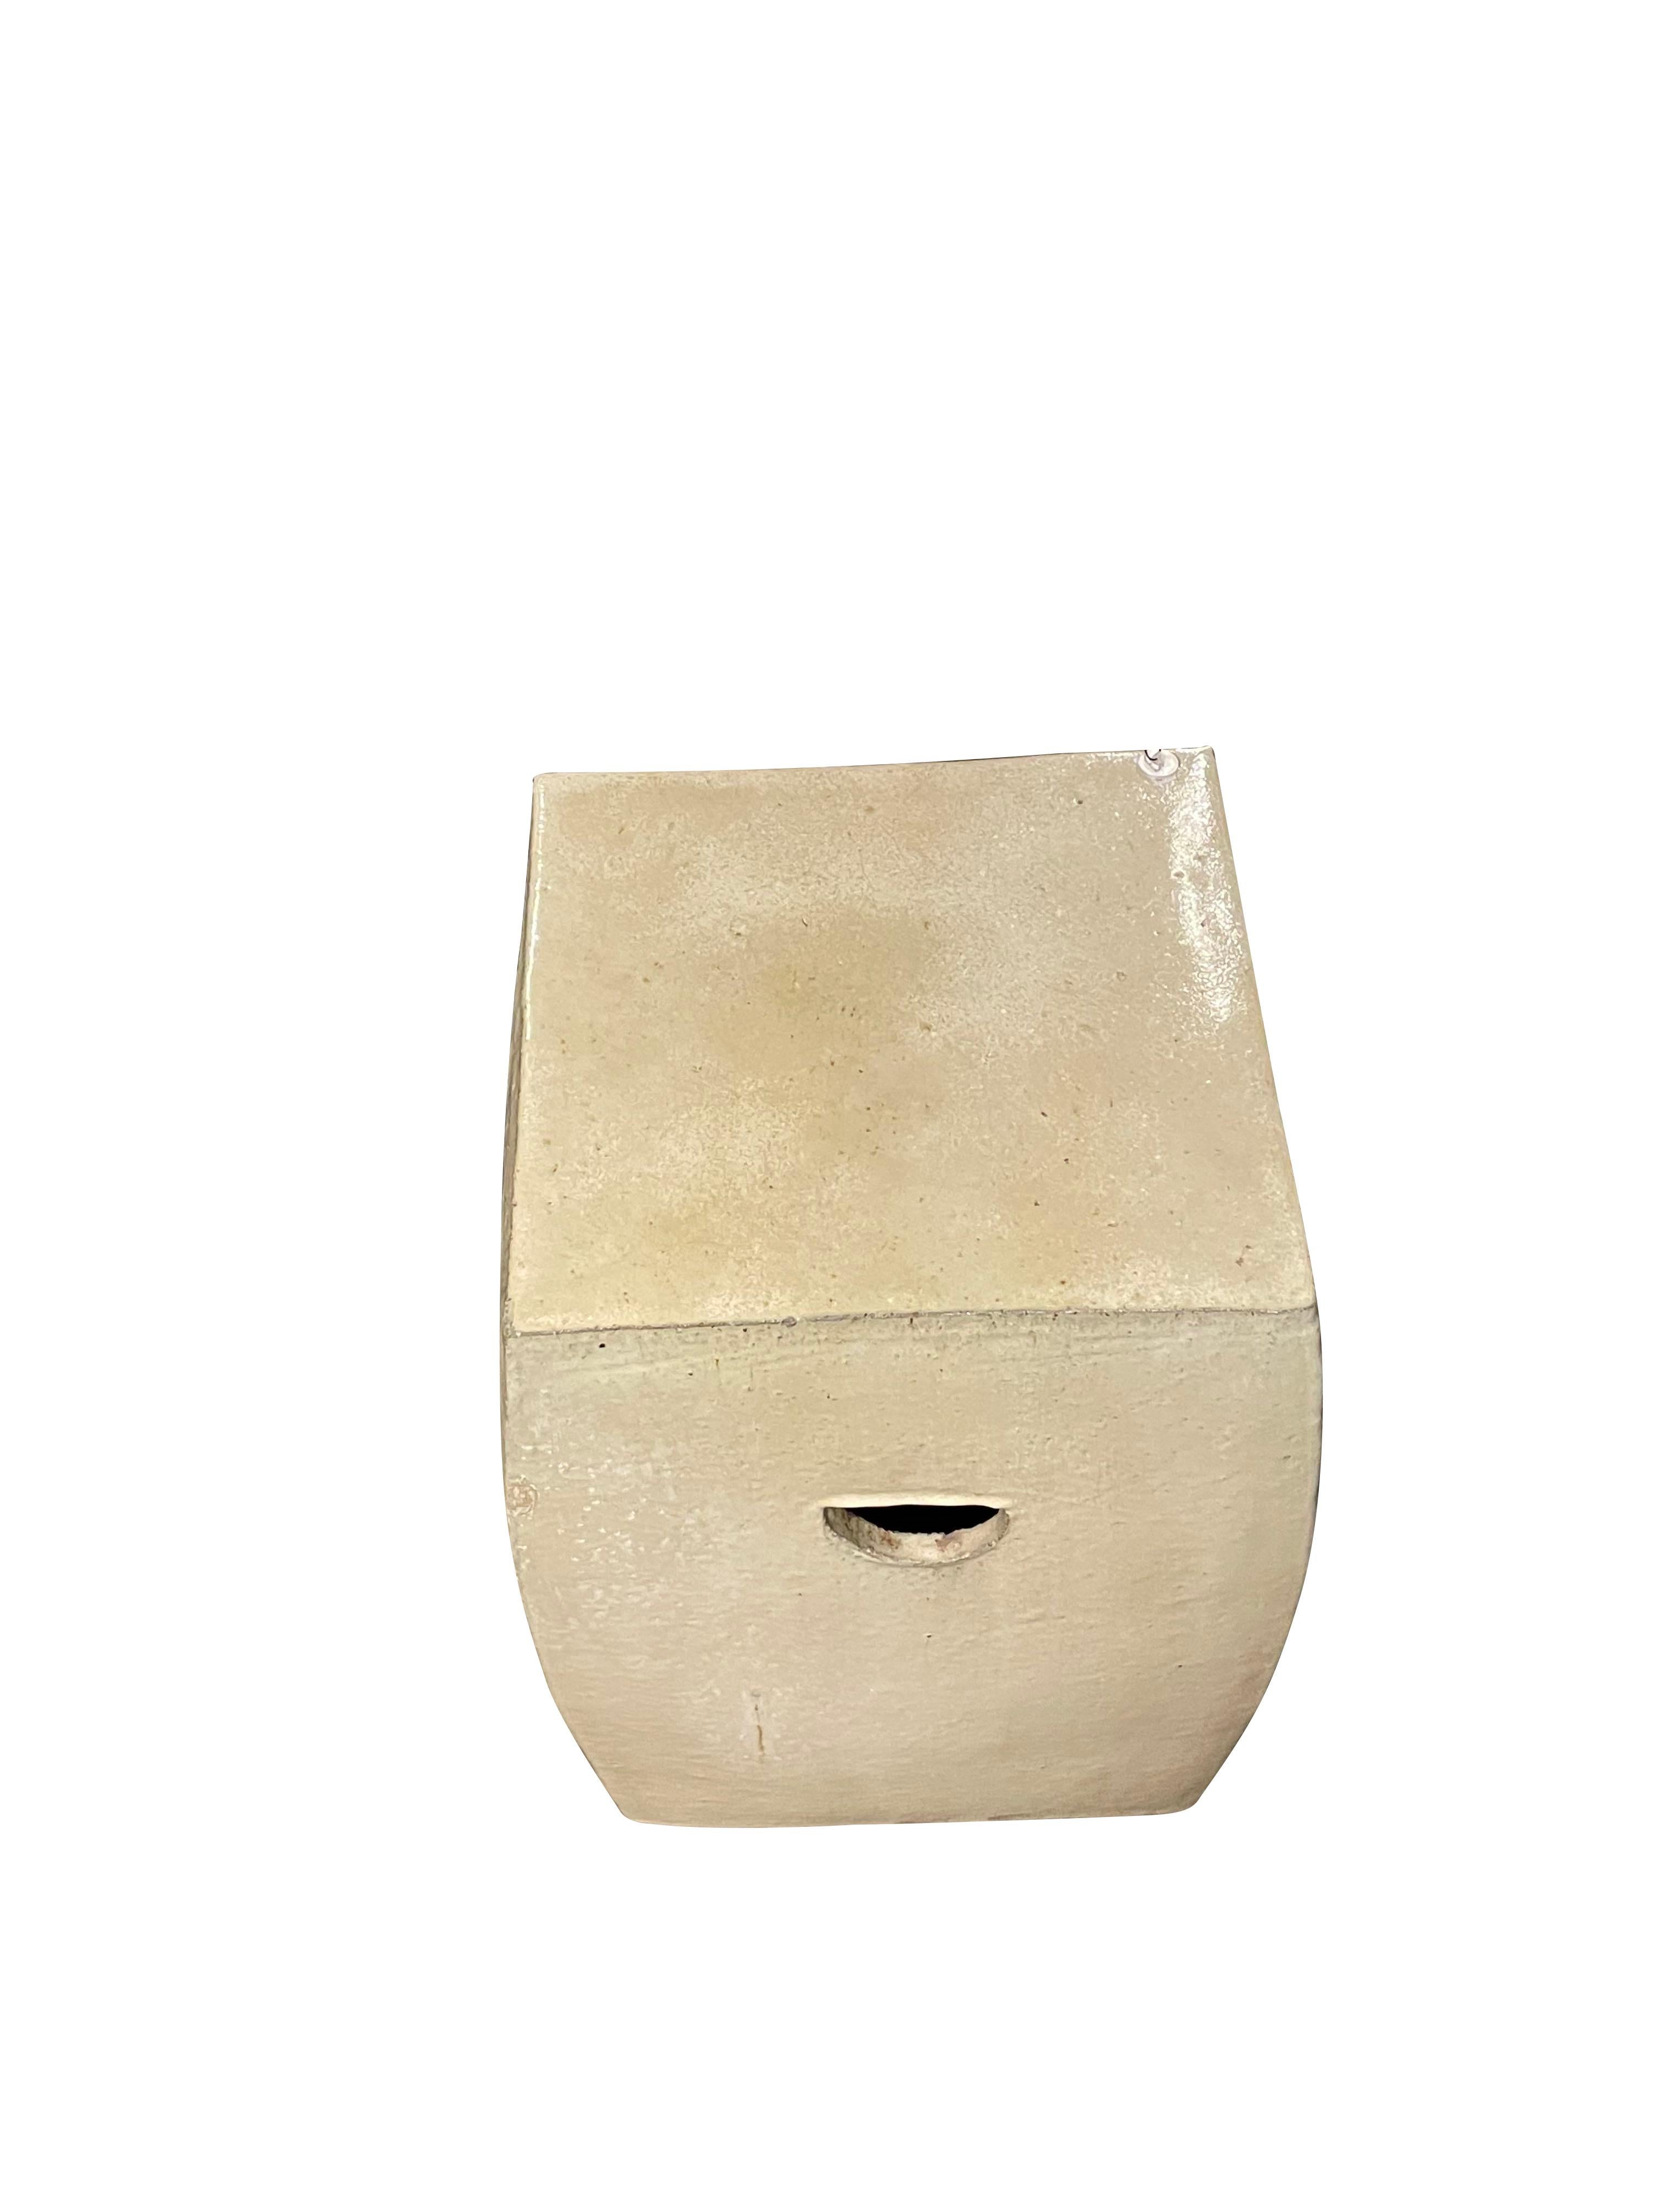 Contemporary Chinese pair of square cream colored high gloss terracotta garden stools.
Self handle for ease of movement.
Durable and functional.
ARRIVES AUGUST